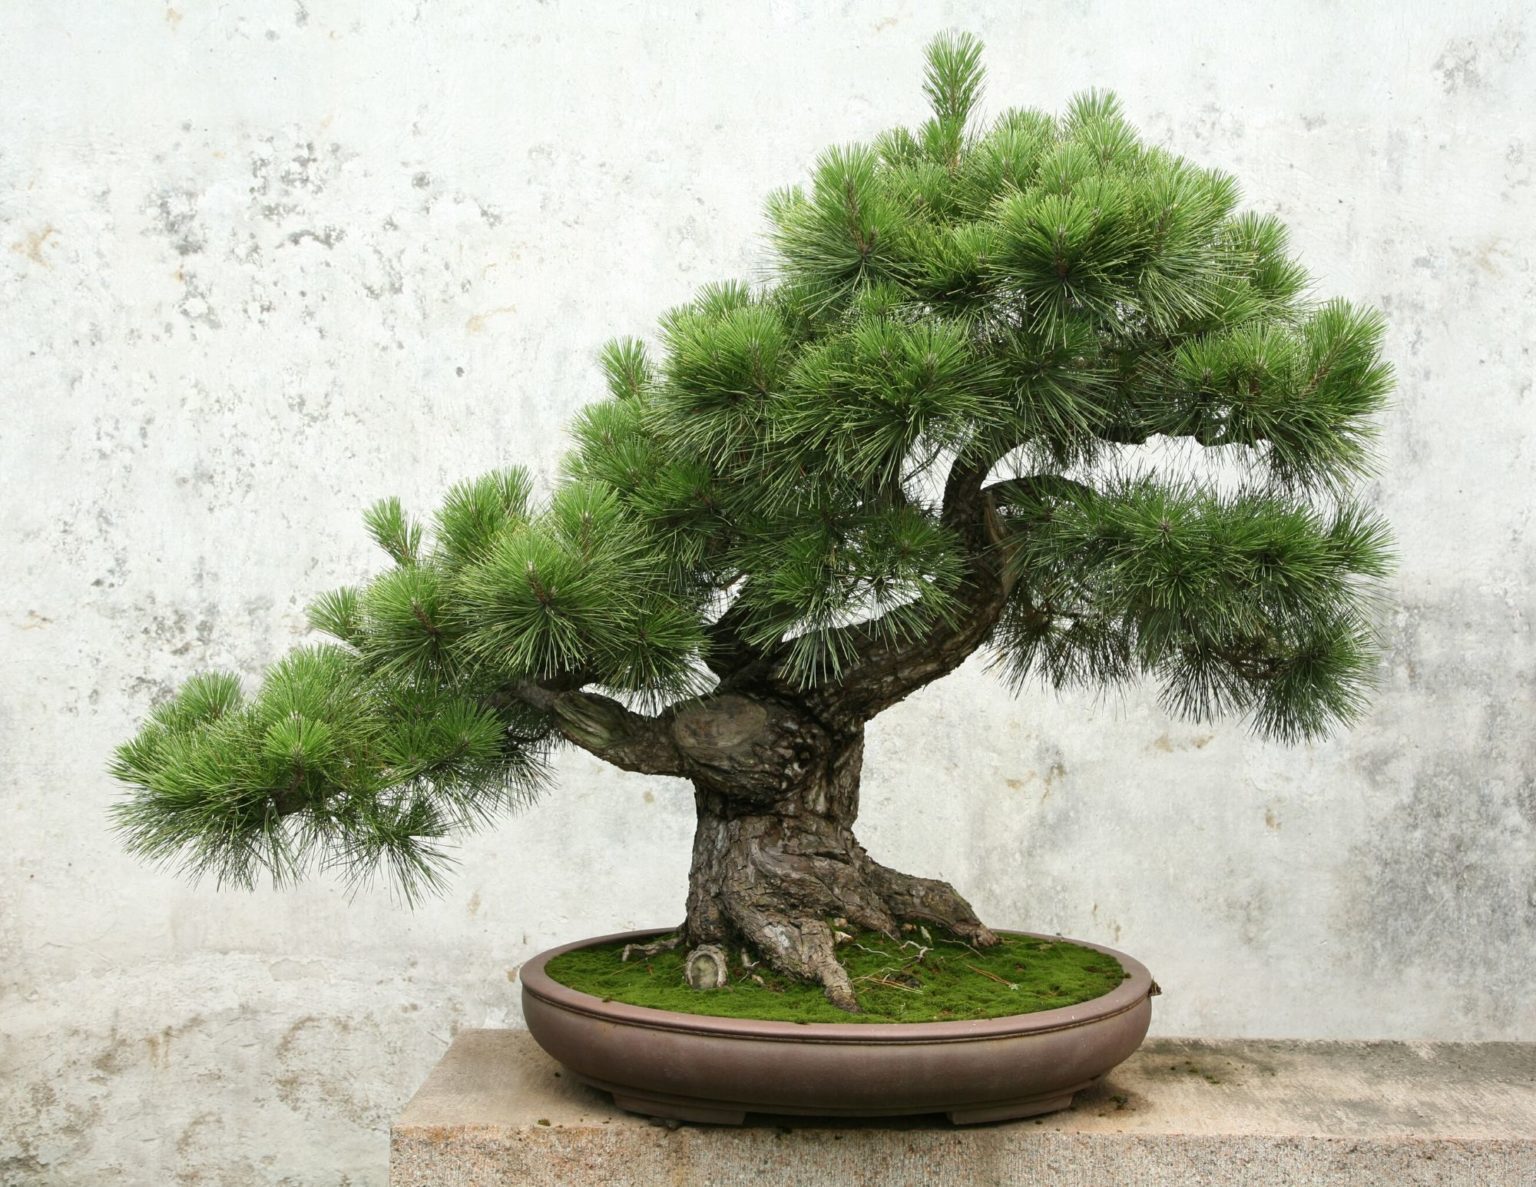  Easy Bonsai Trees  The ultimate guide 